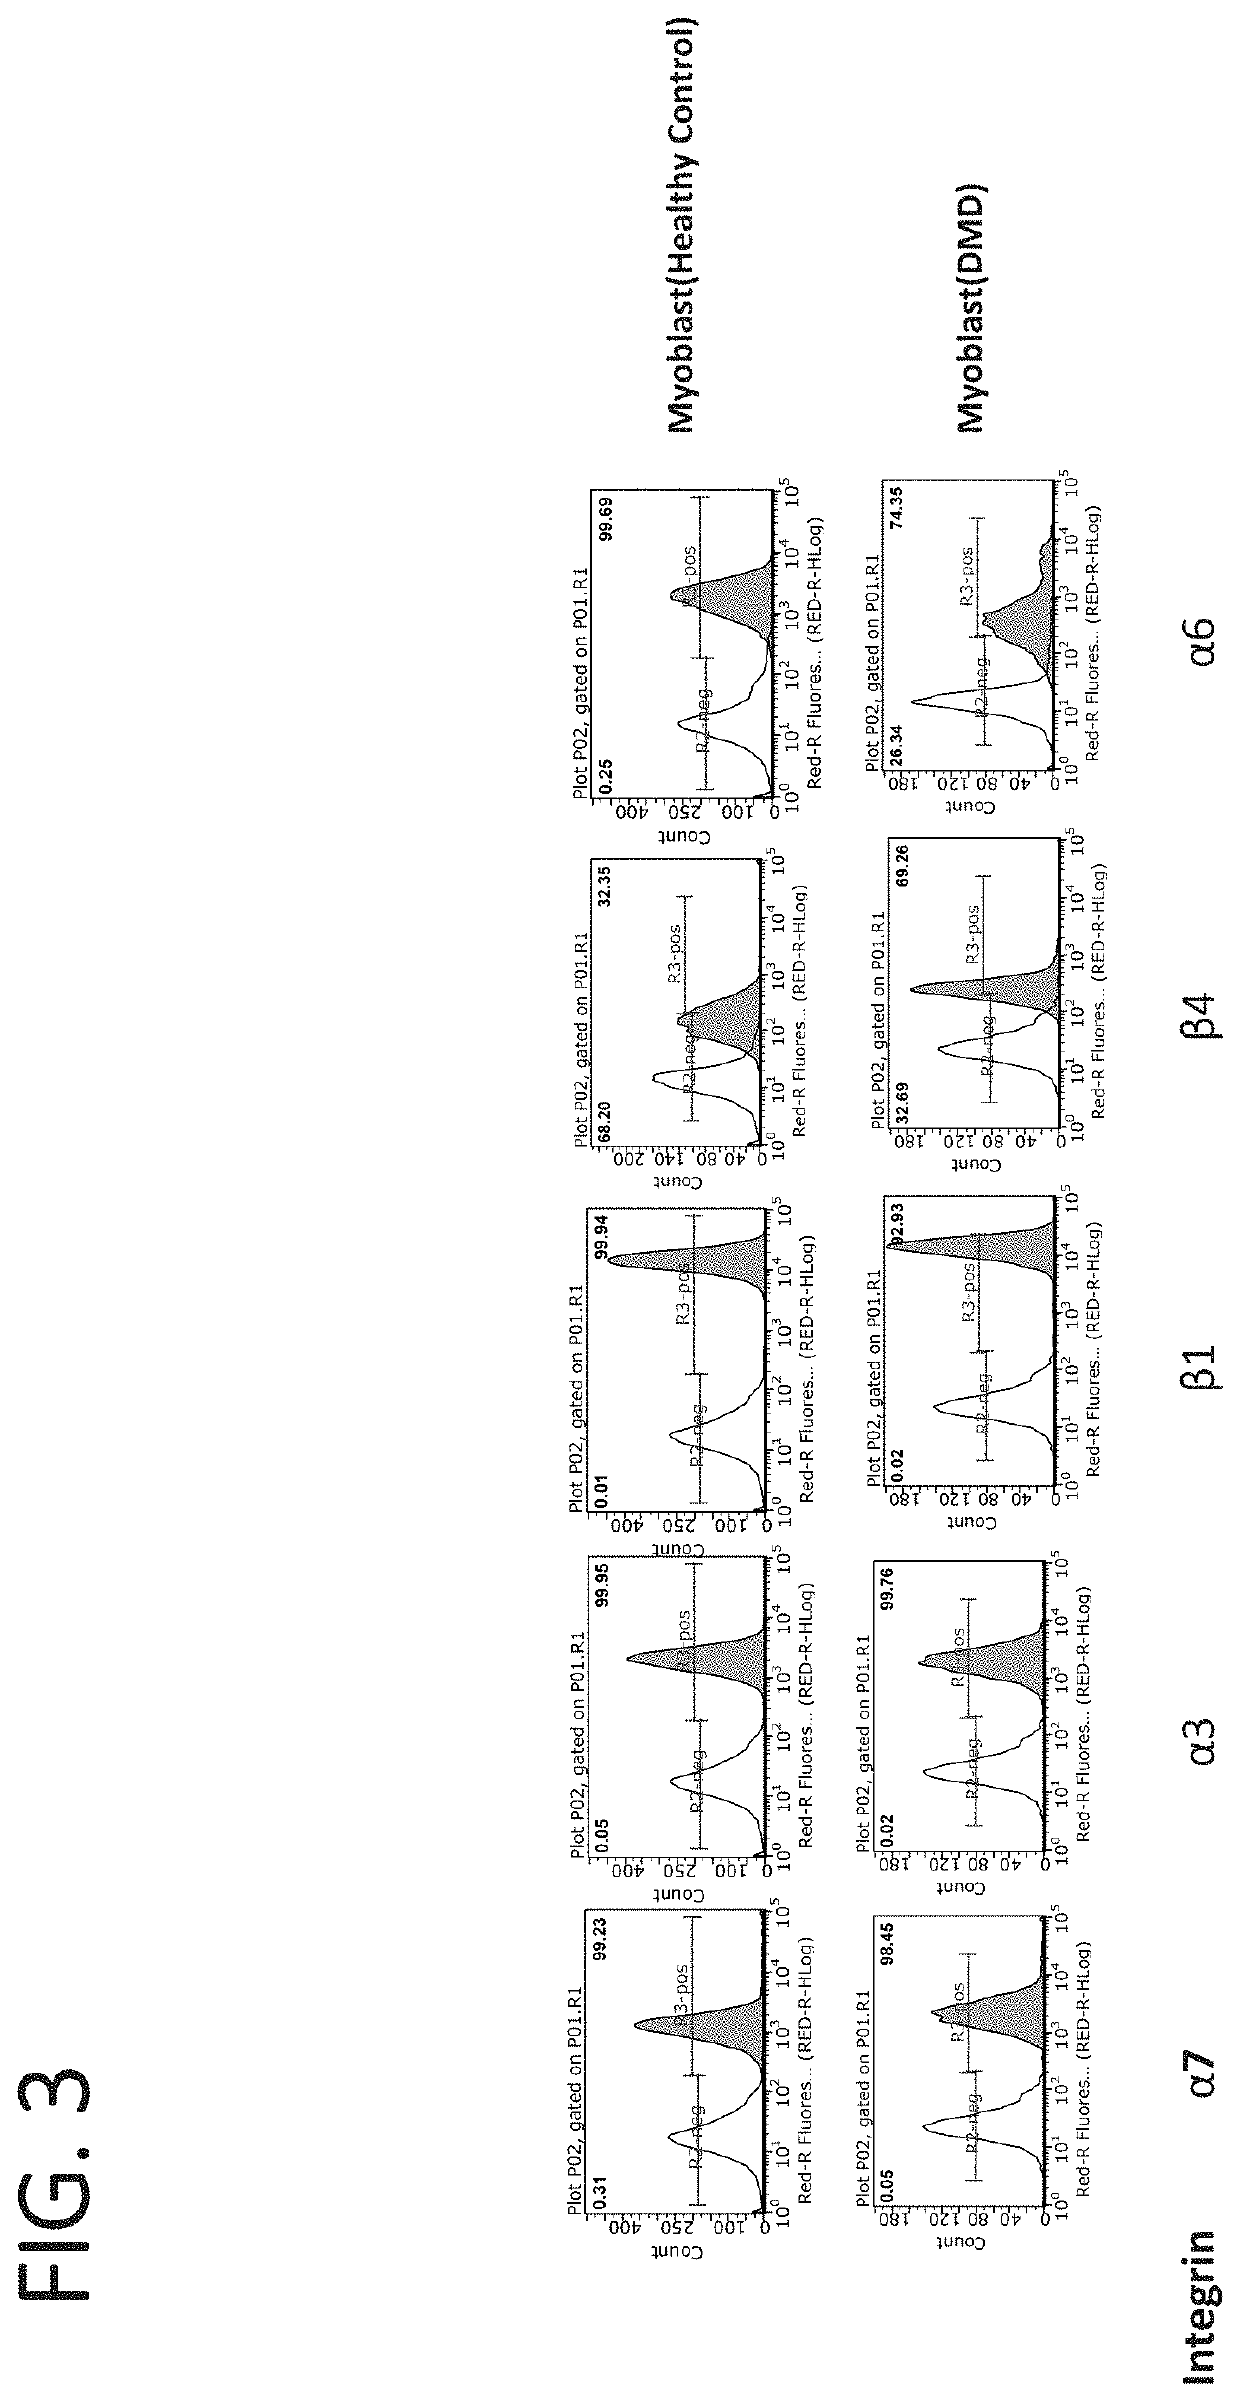 Compositions and methods for activation of integrins